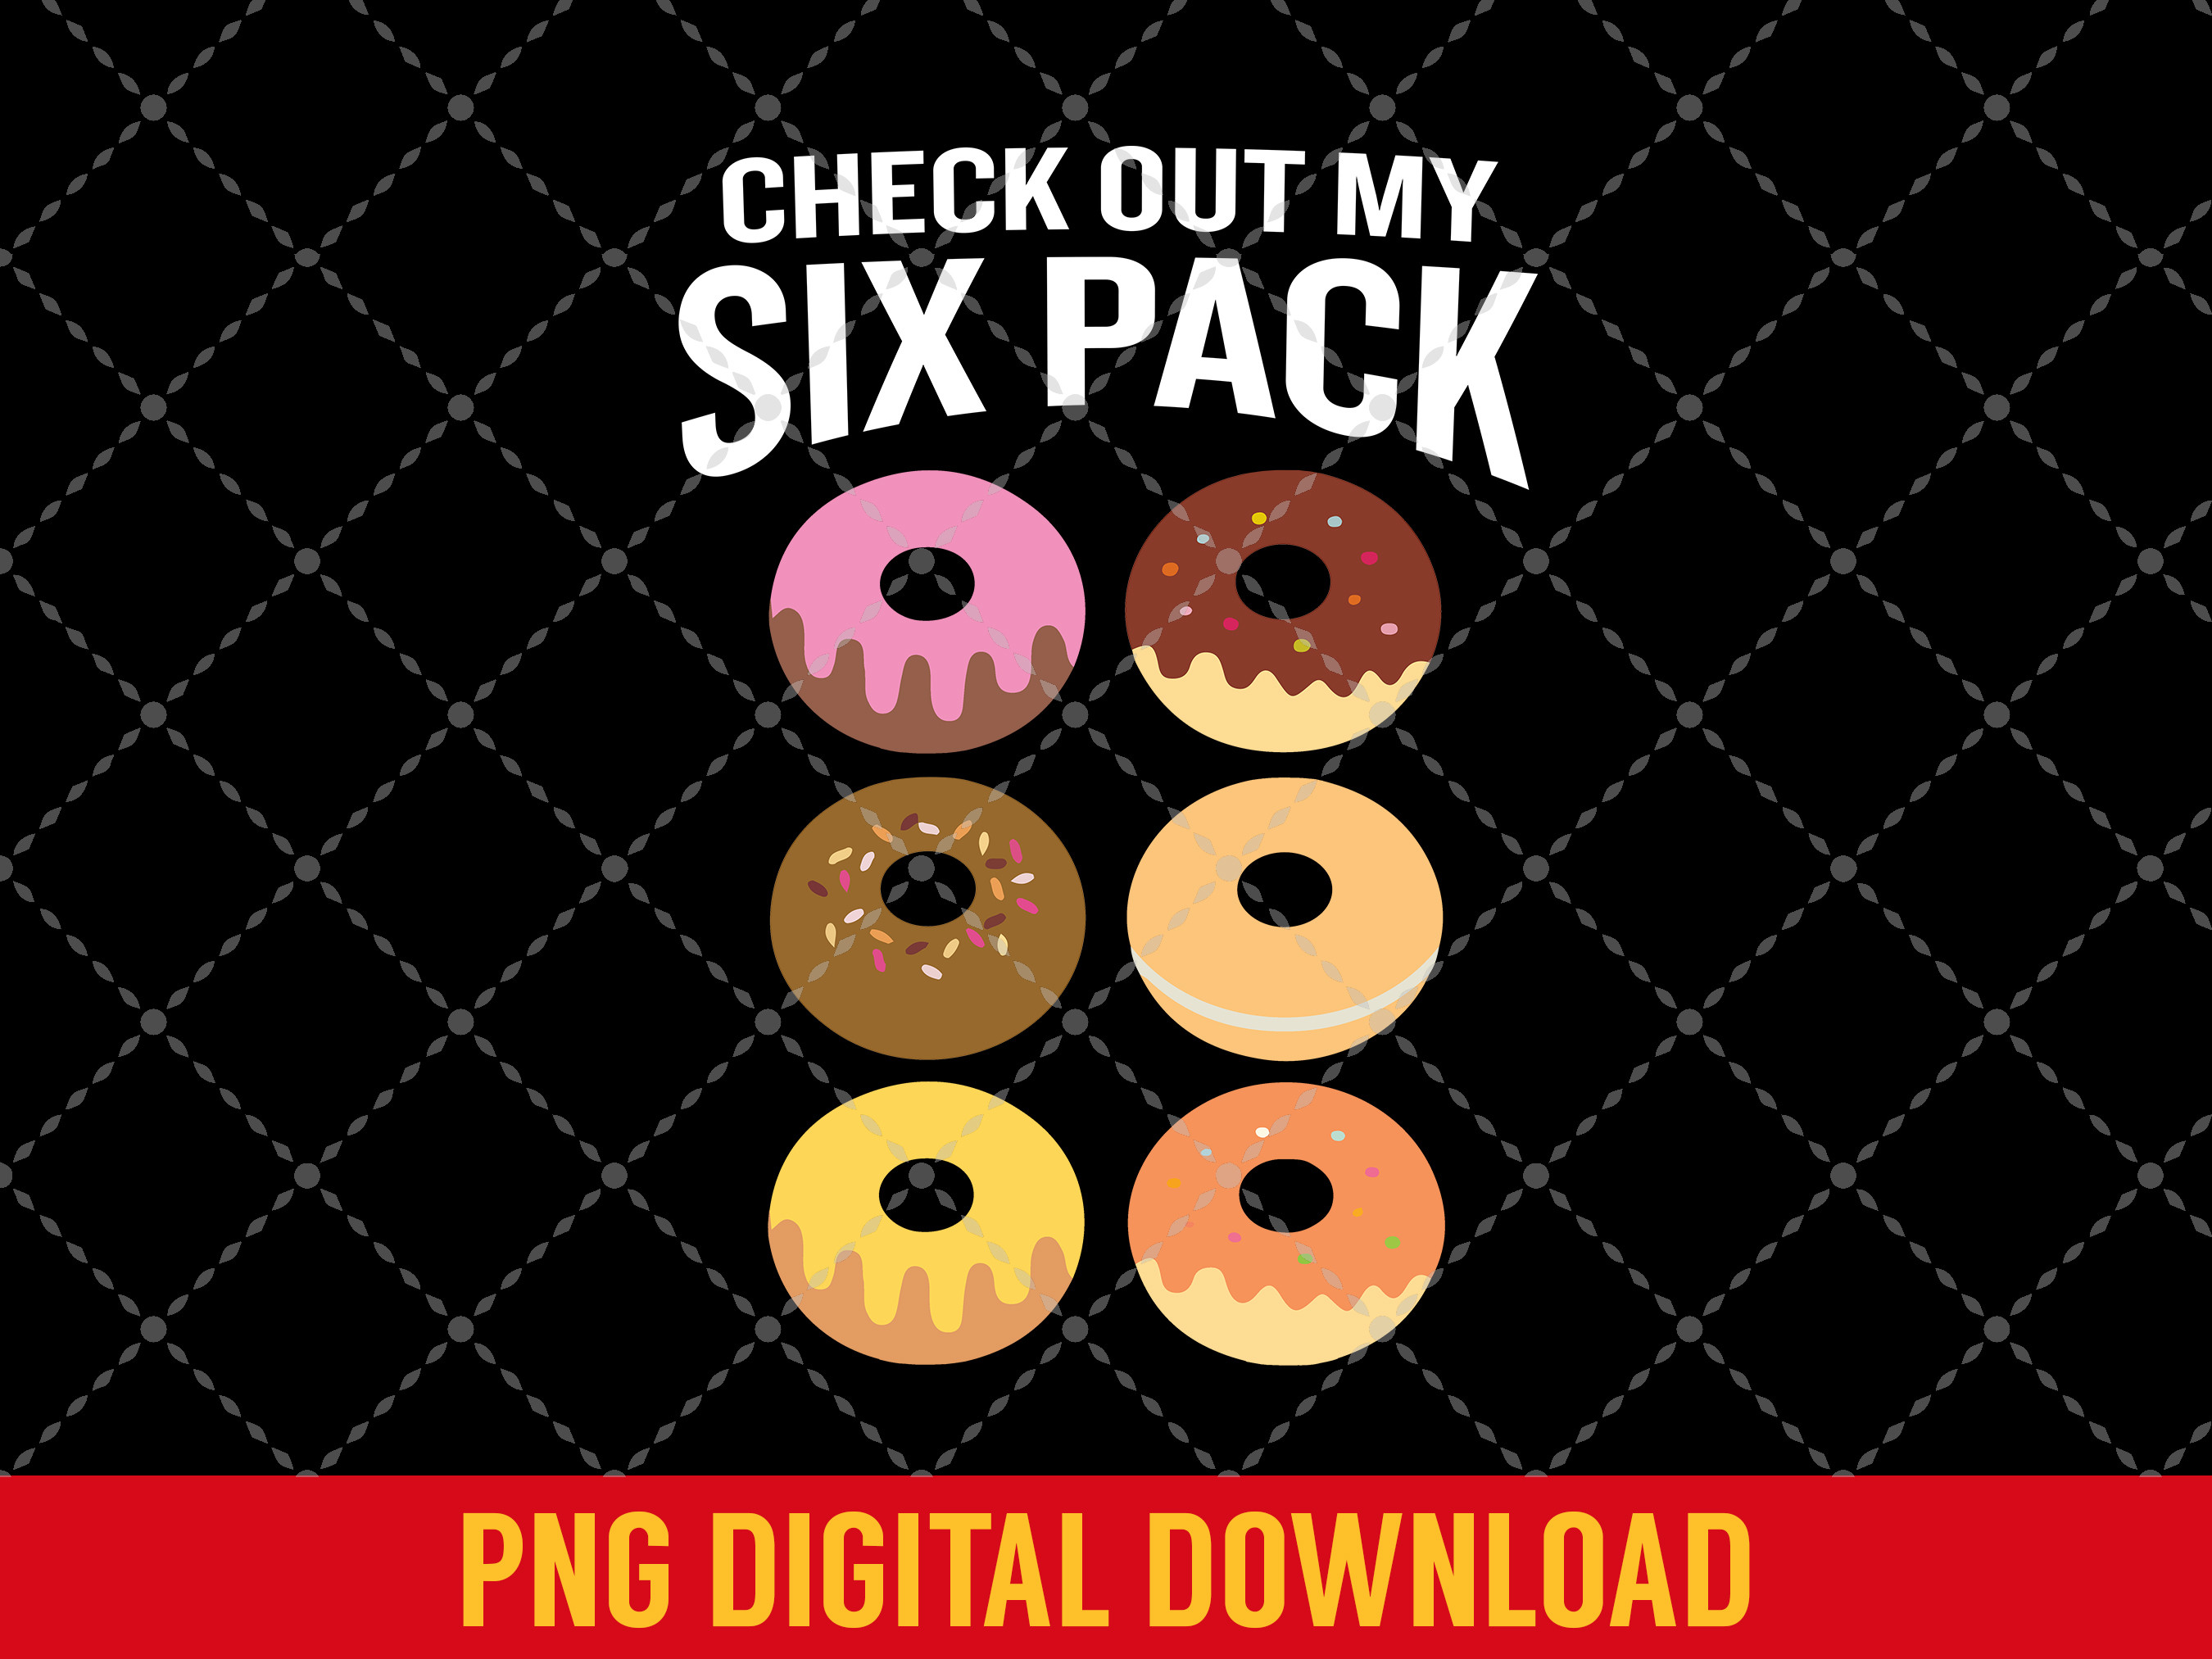 https://www.creativefabrica.com/wp-content/uploads/2022/11/29/Check-Out-My-Six-Pack-Funny-Donuts-Abs-Graphics-49281913-1.jpg